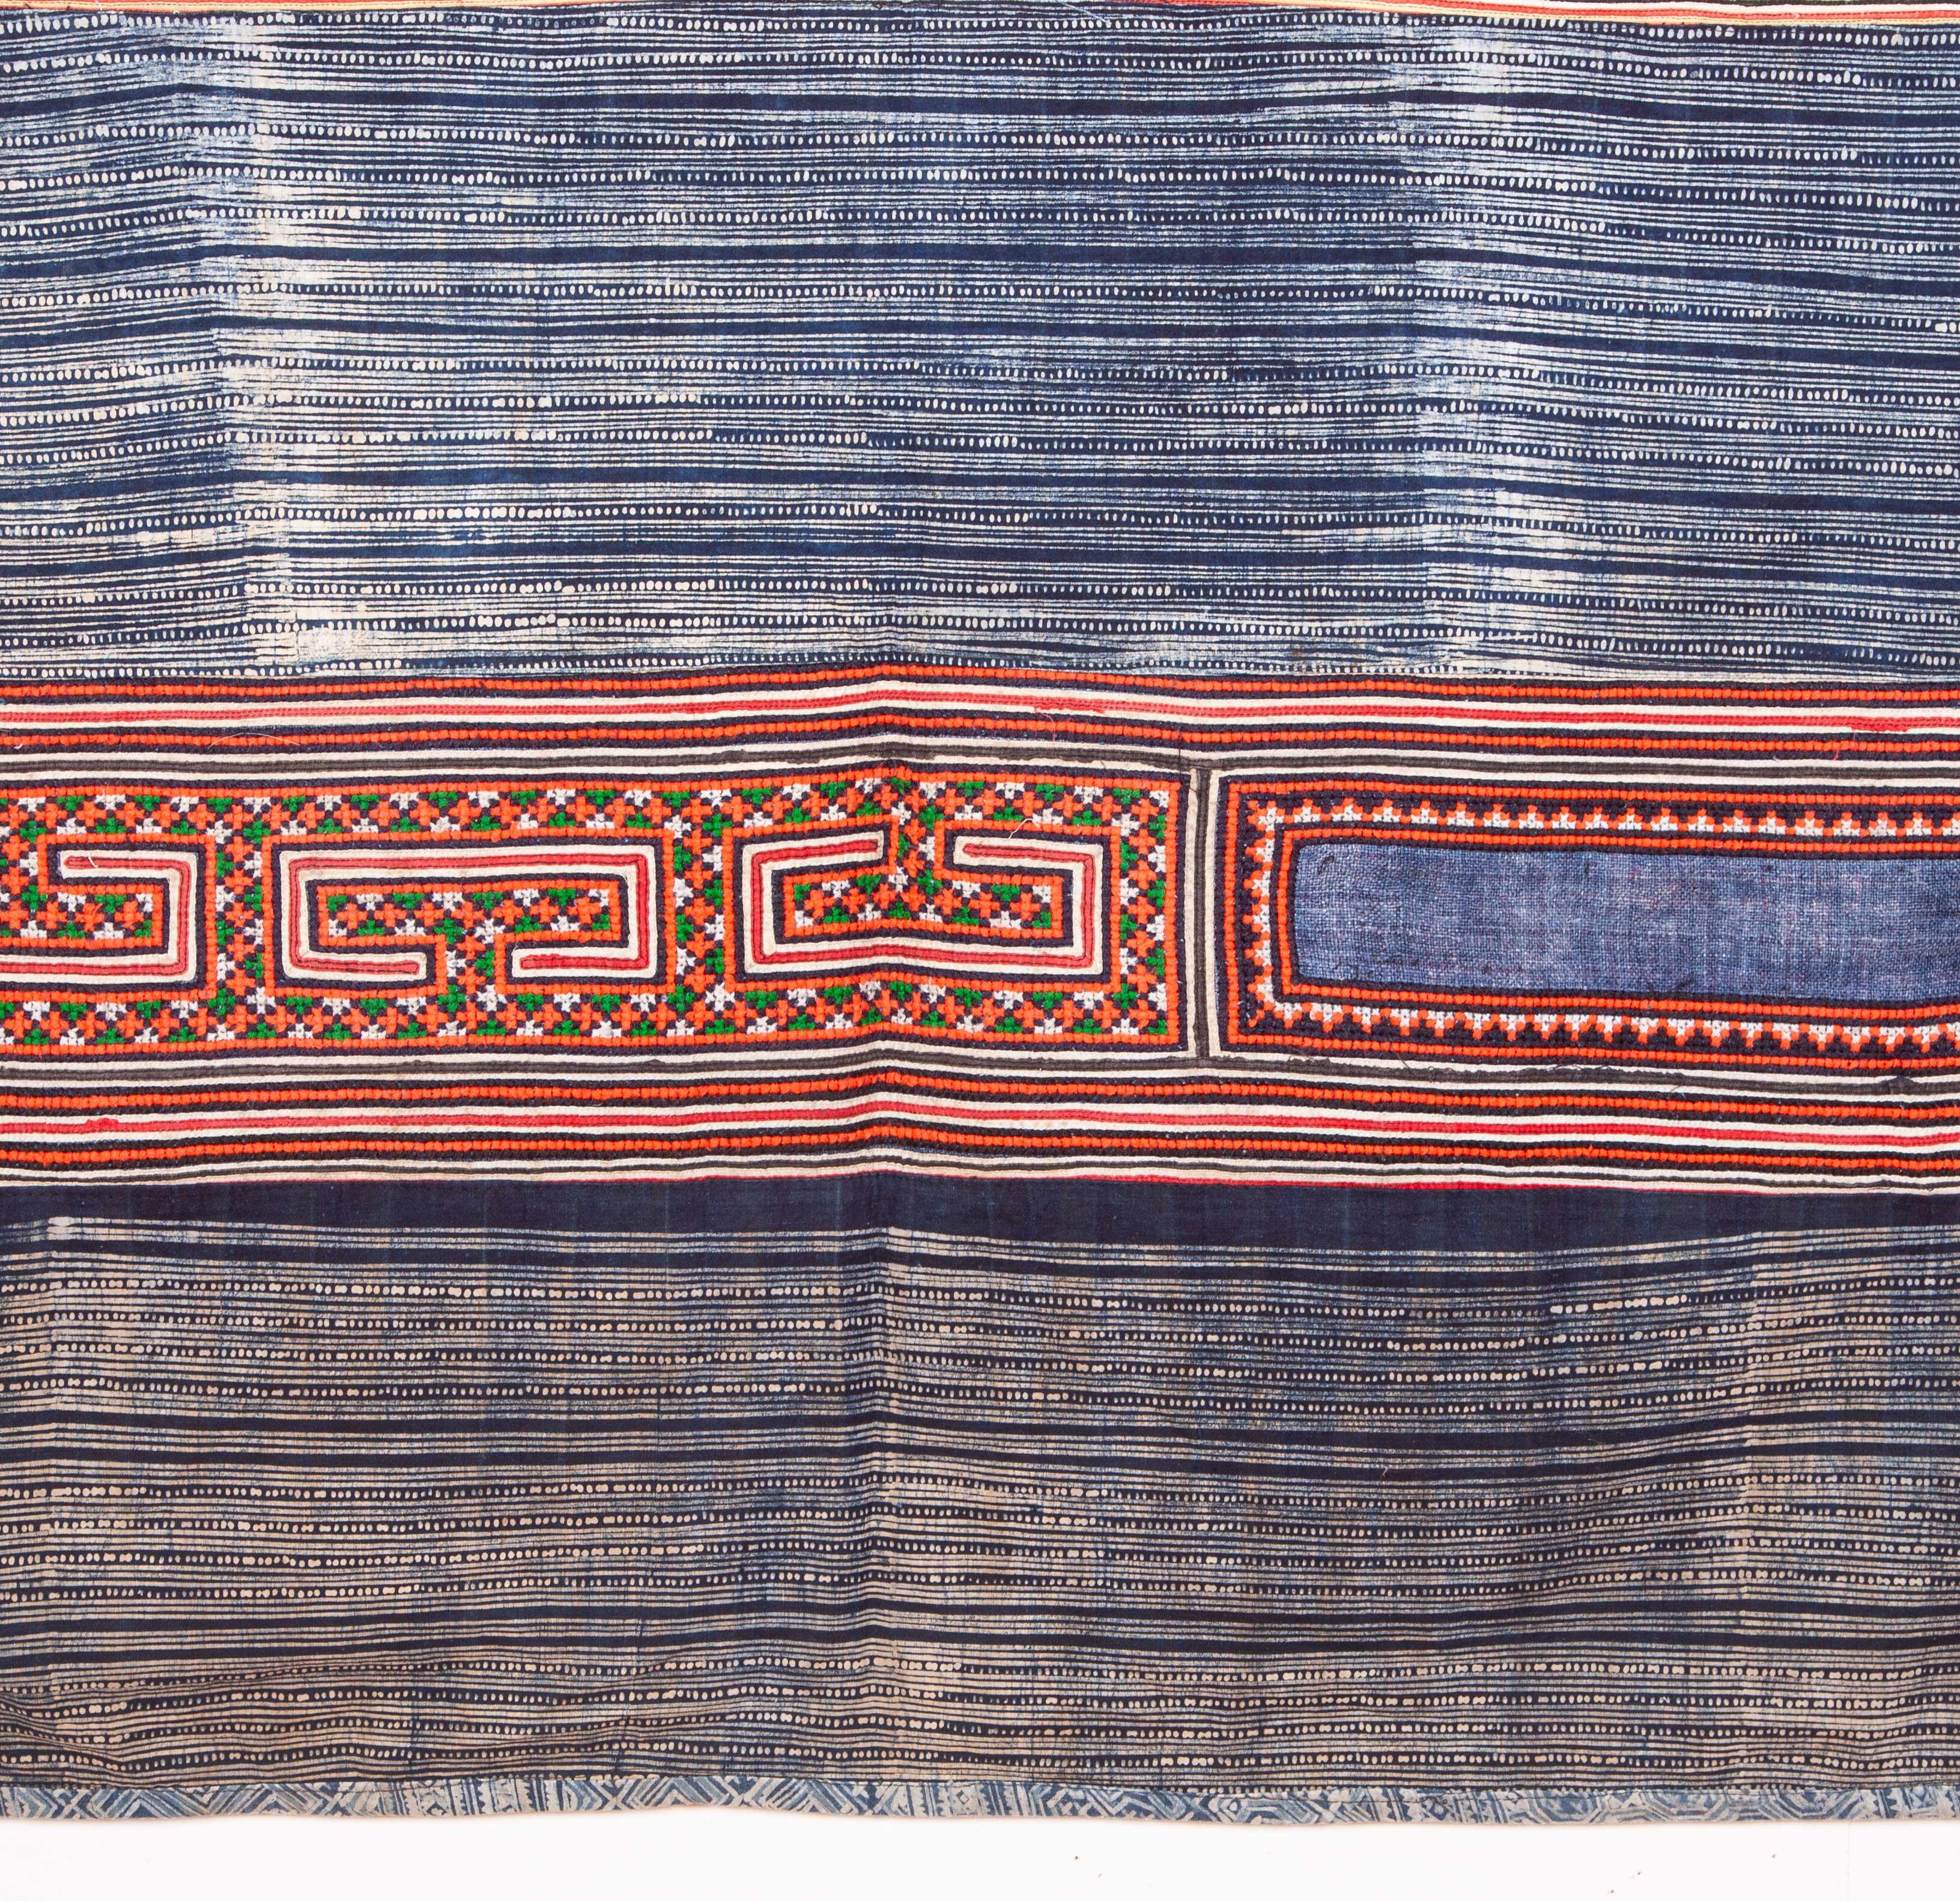 Tribal Hmong Batik and Embroidered Blanket with Indigo Color, Mid-20th Century For Sale